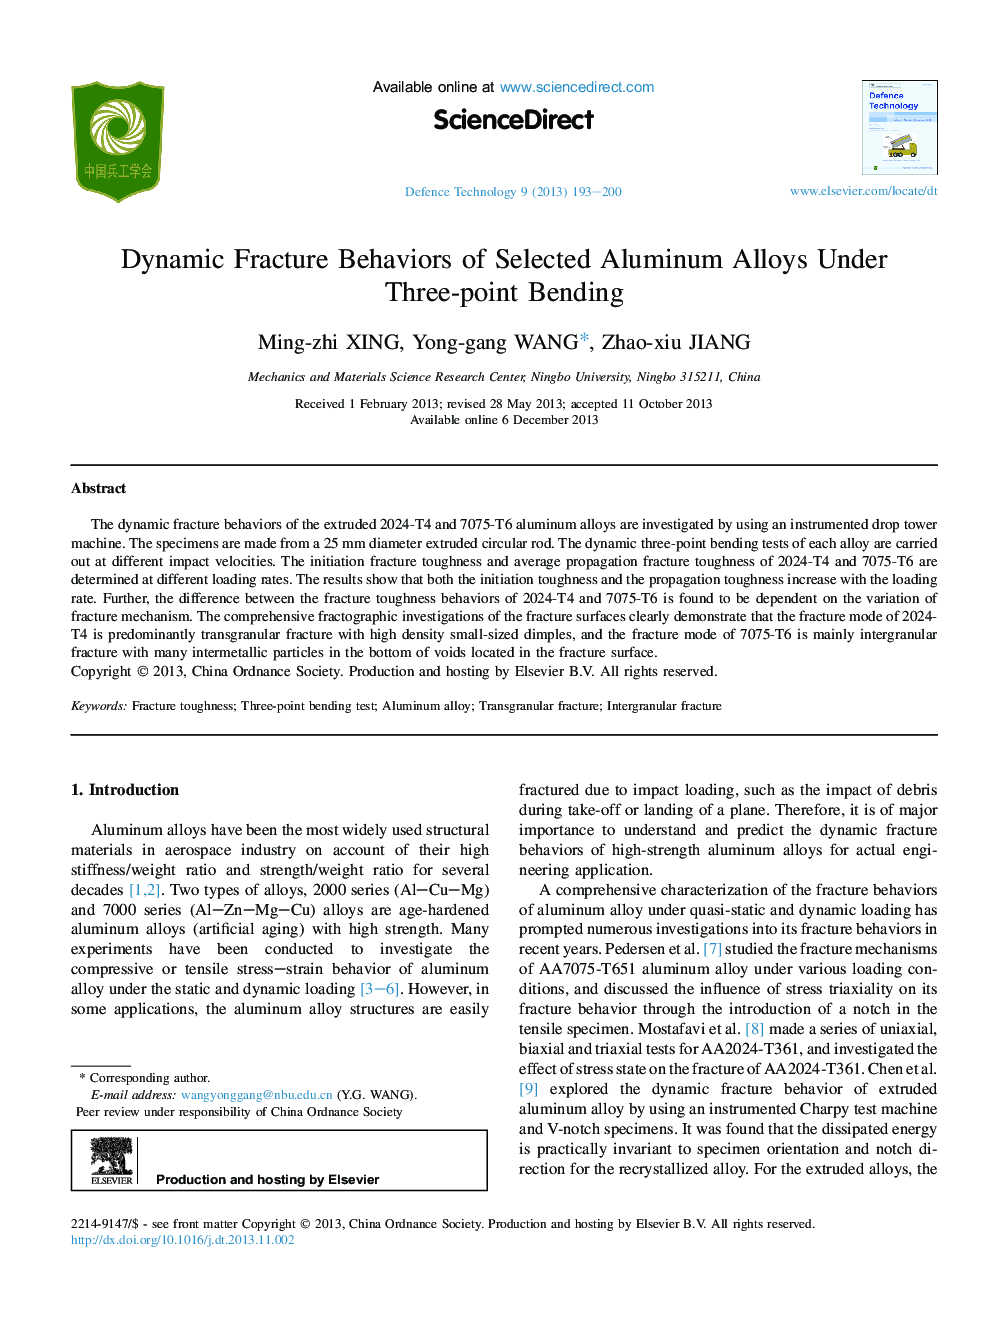 Dynamic Fracture Behaviors of Selected Aluminum Alloys Under Three-point Bending 